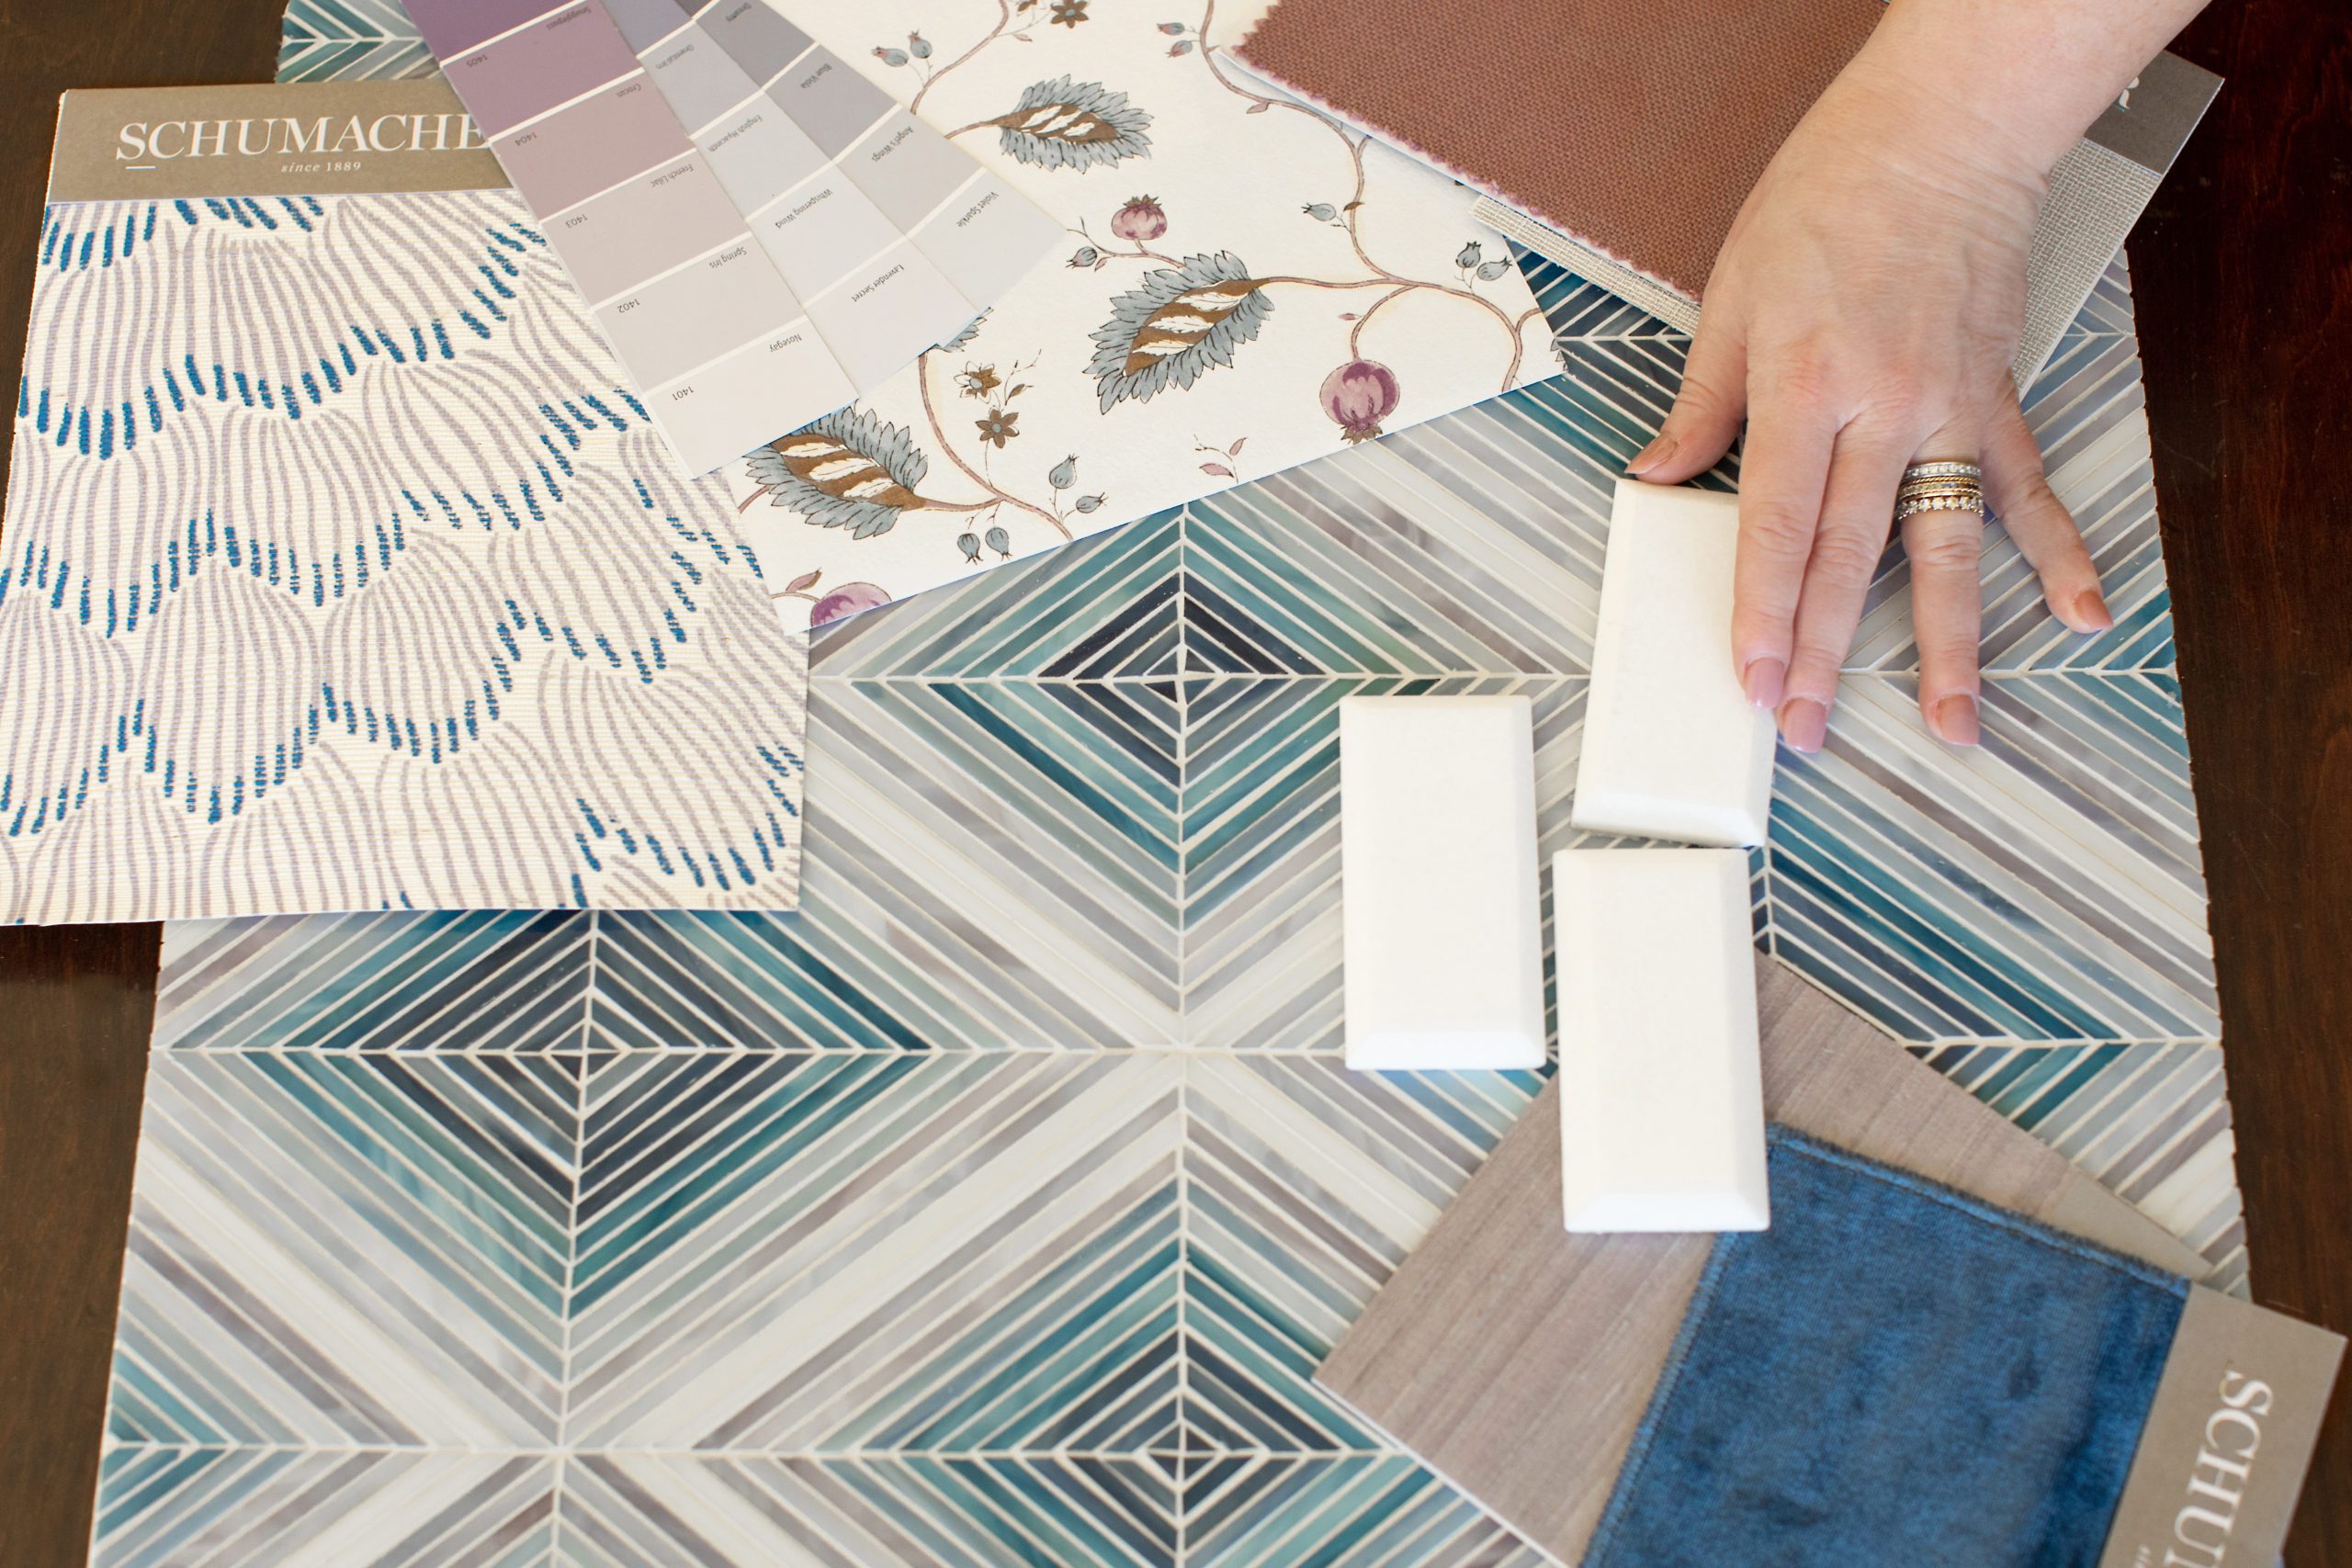 Sarah reviews bold interior design selections of fabric, tile, and paint swatched